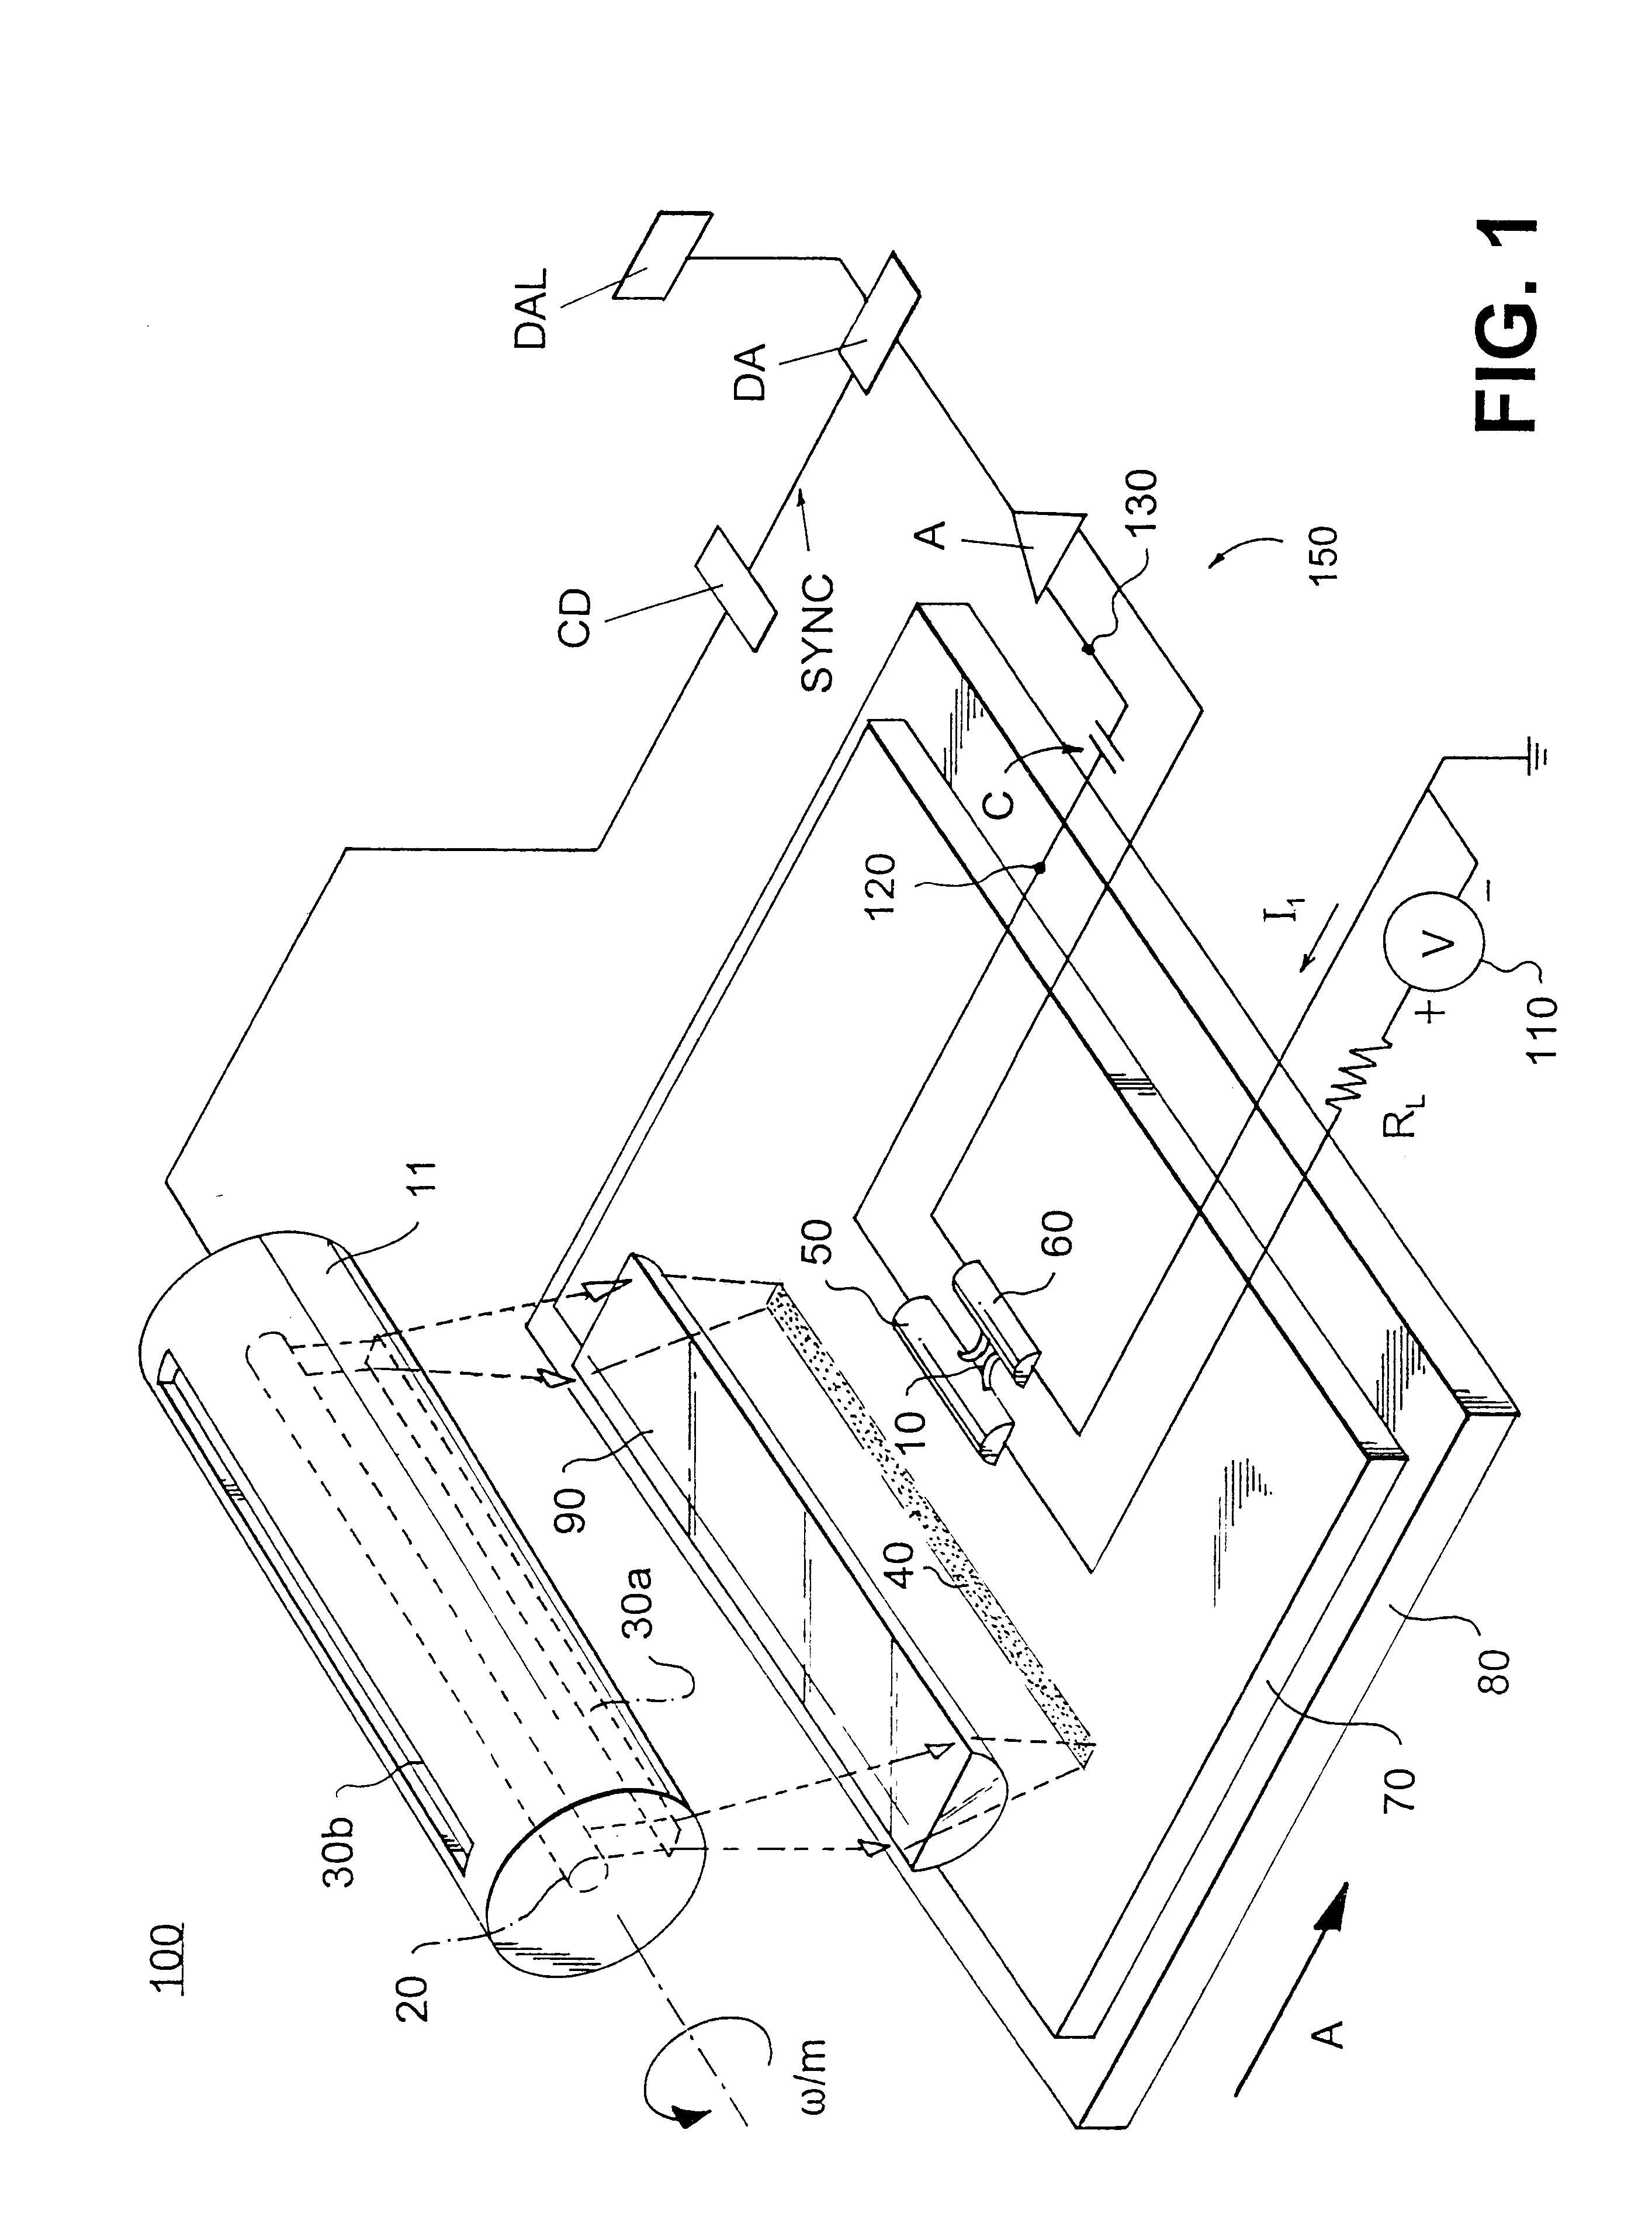 Thermal modulation system and method for locating a circuit defect such as a short or incipient open independent of a circuit geometry